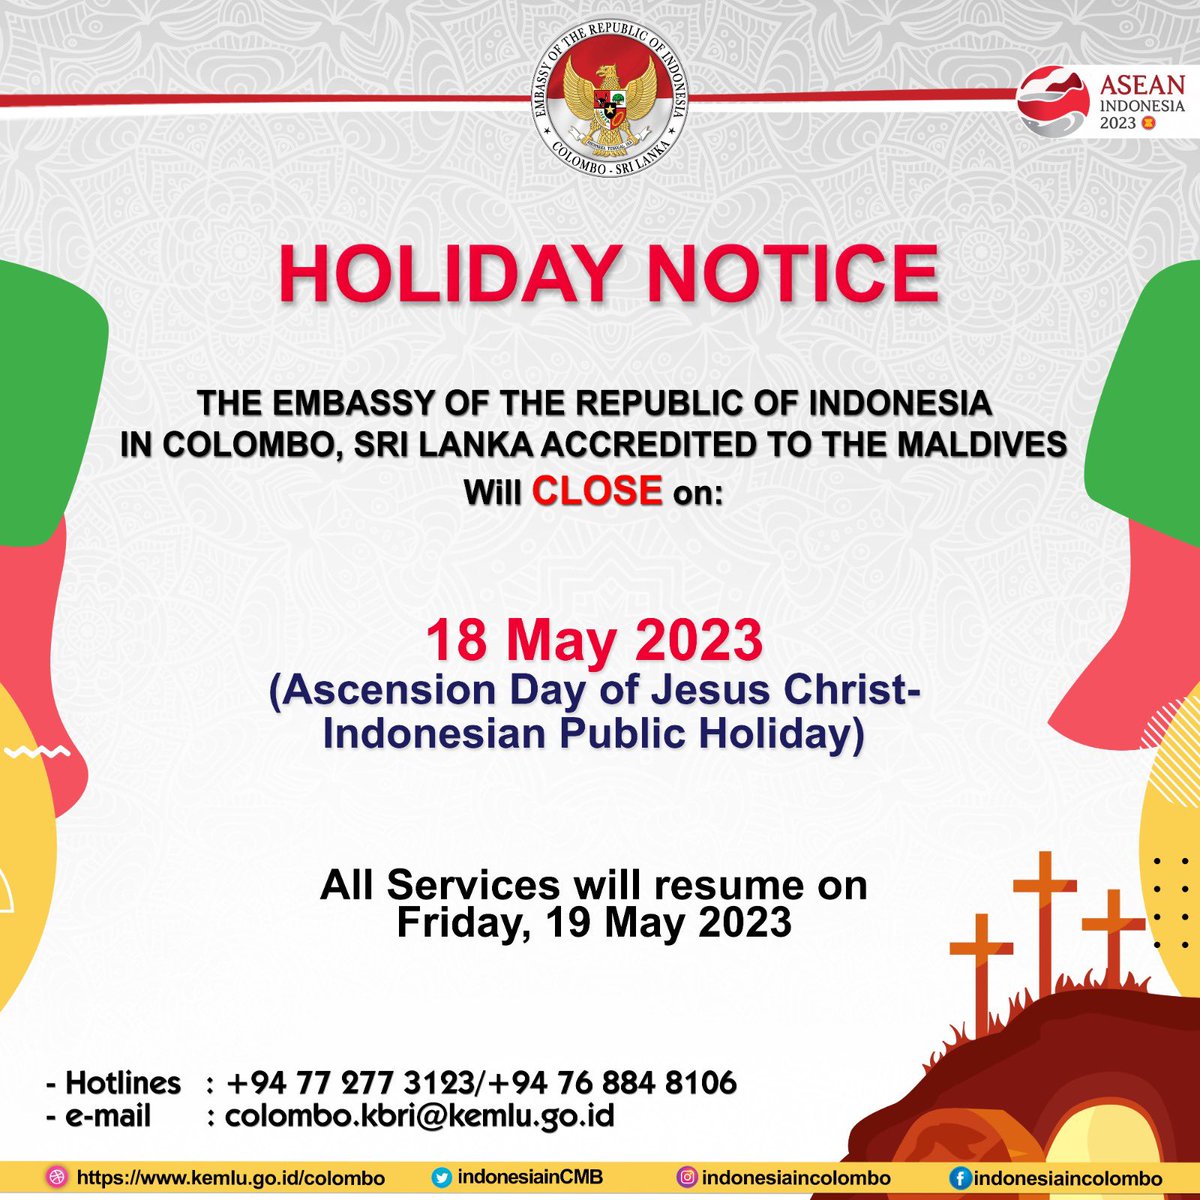 In Celebration of 
Ascension Day of Jesus Christ
The Indonesian Embassy in Colombo will close on 18 May 2023 
and will resume
on FRIDAY, 19 May 2023.

In case of emergency please call 
hotline of the embassy : 
+94 77 277 3123 / +94 76 884 8106

#inidiplomasi #indonesiaincolombo